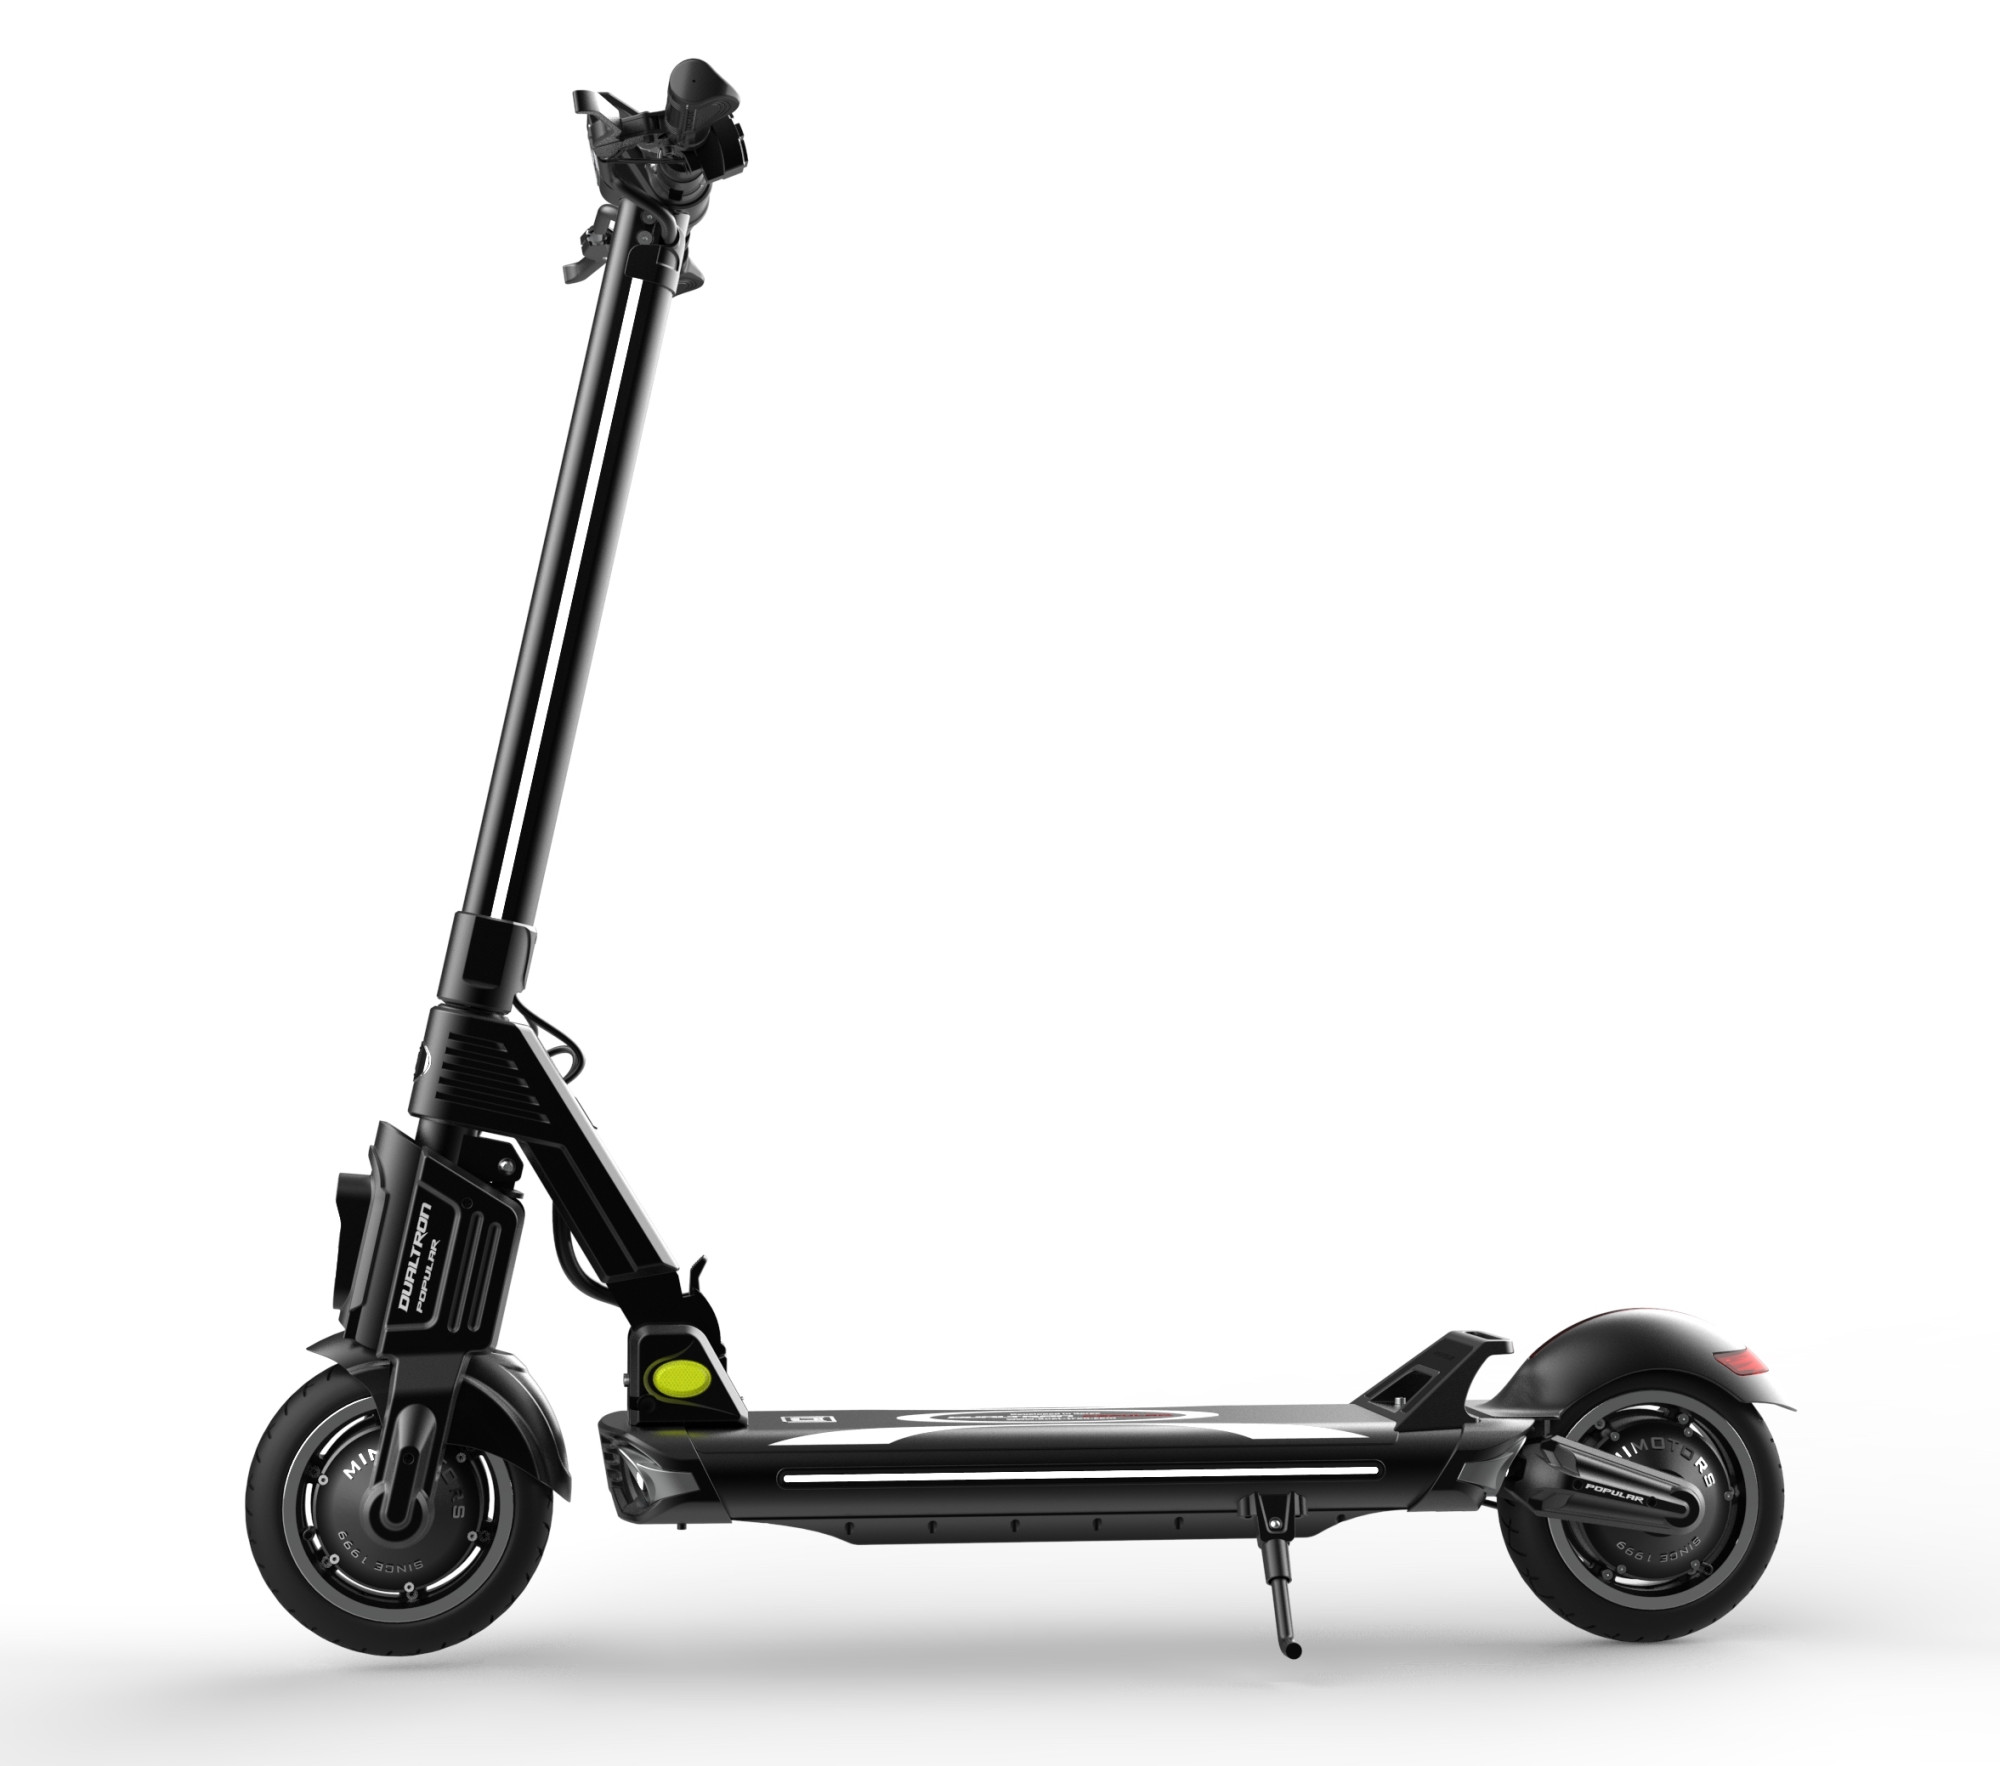 Duatron Popular electric scooter – new model in stock - Enjoy the ride